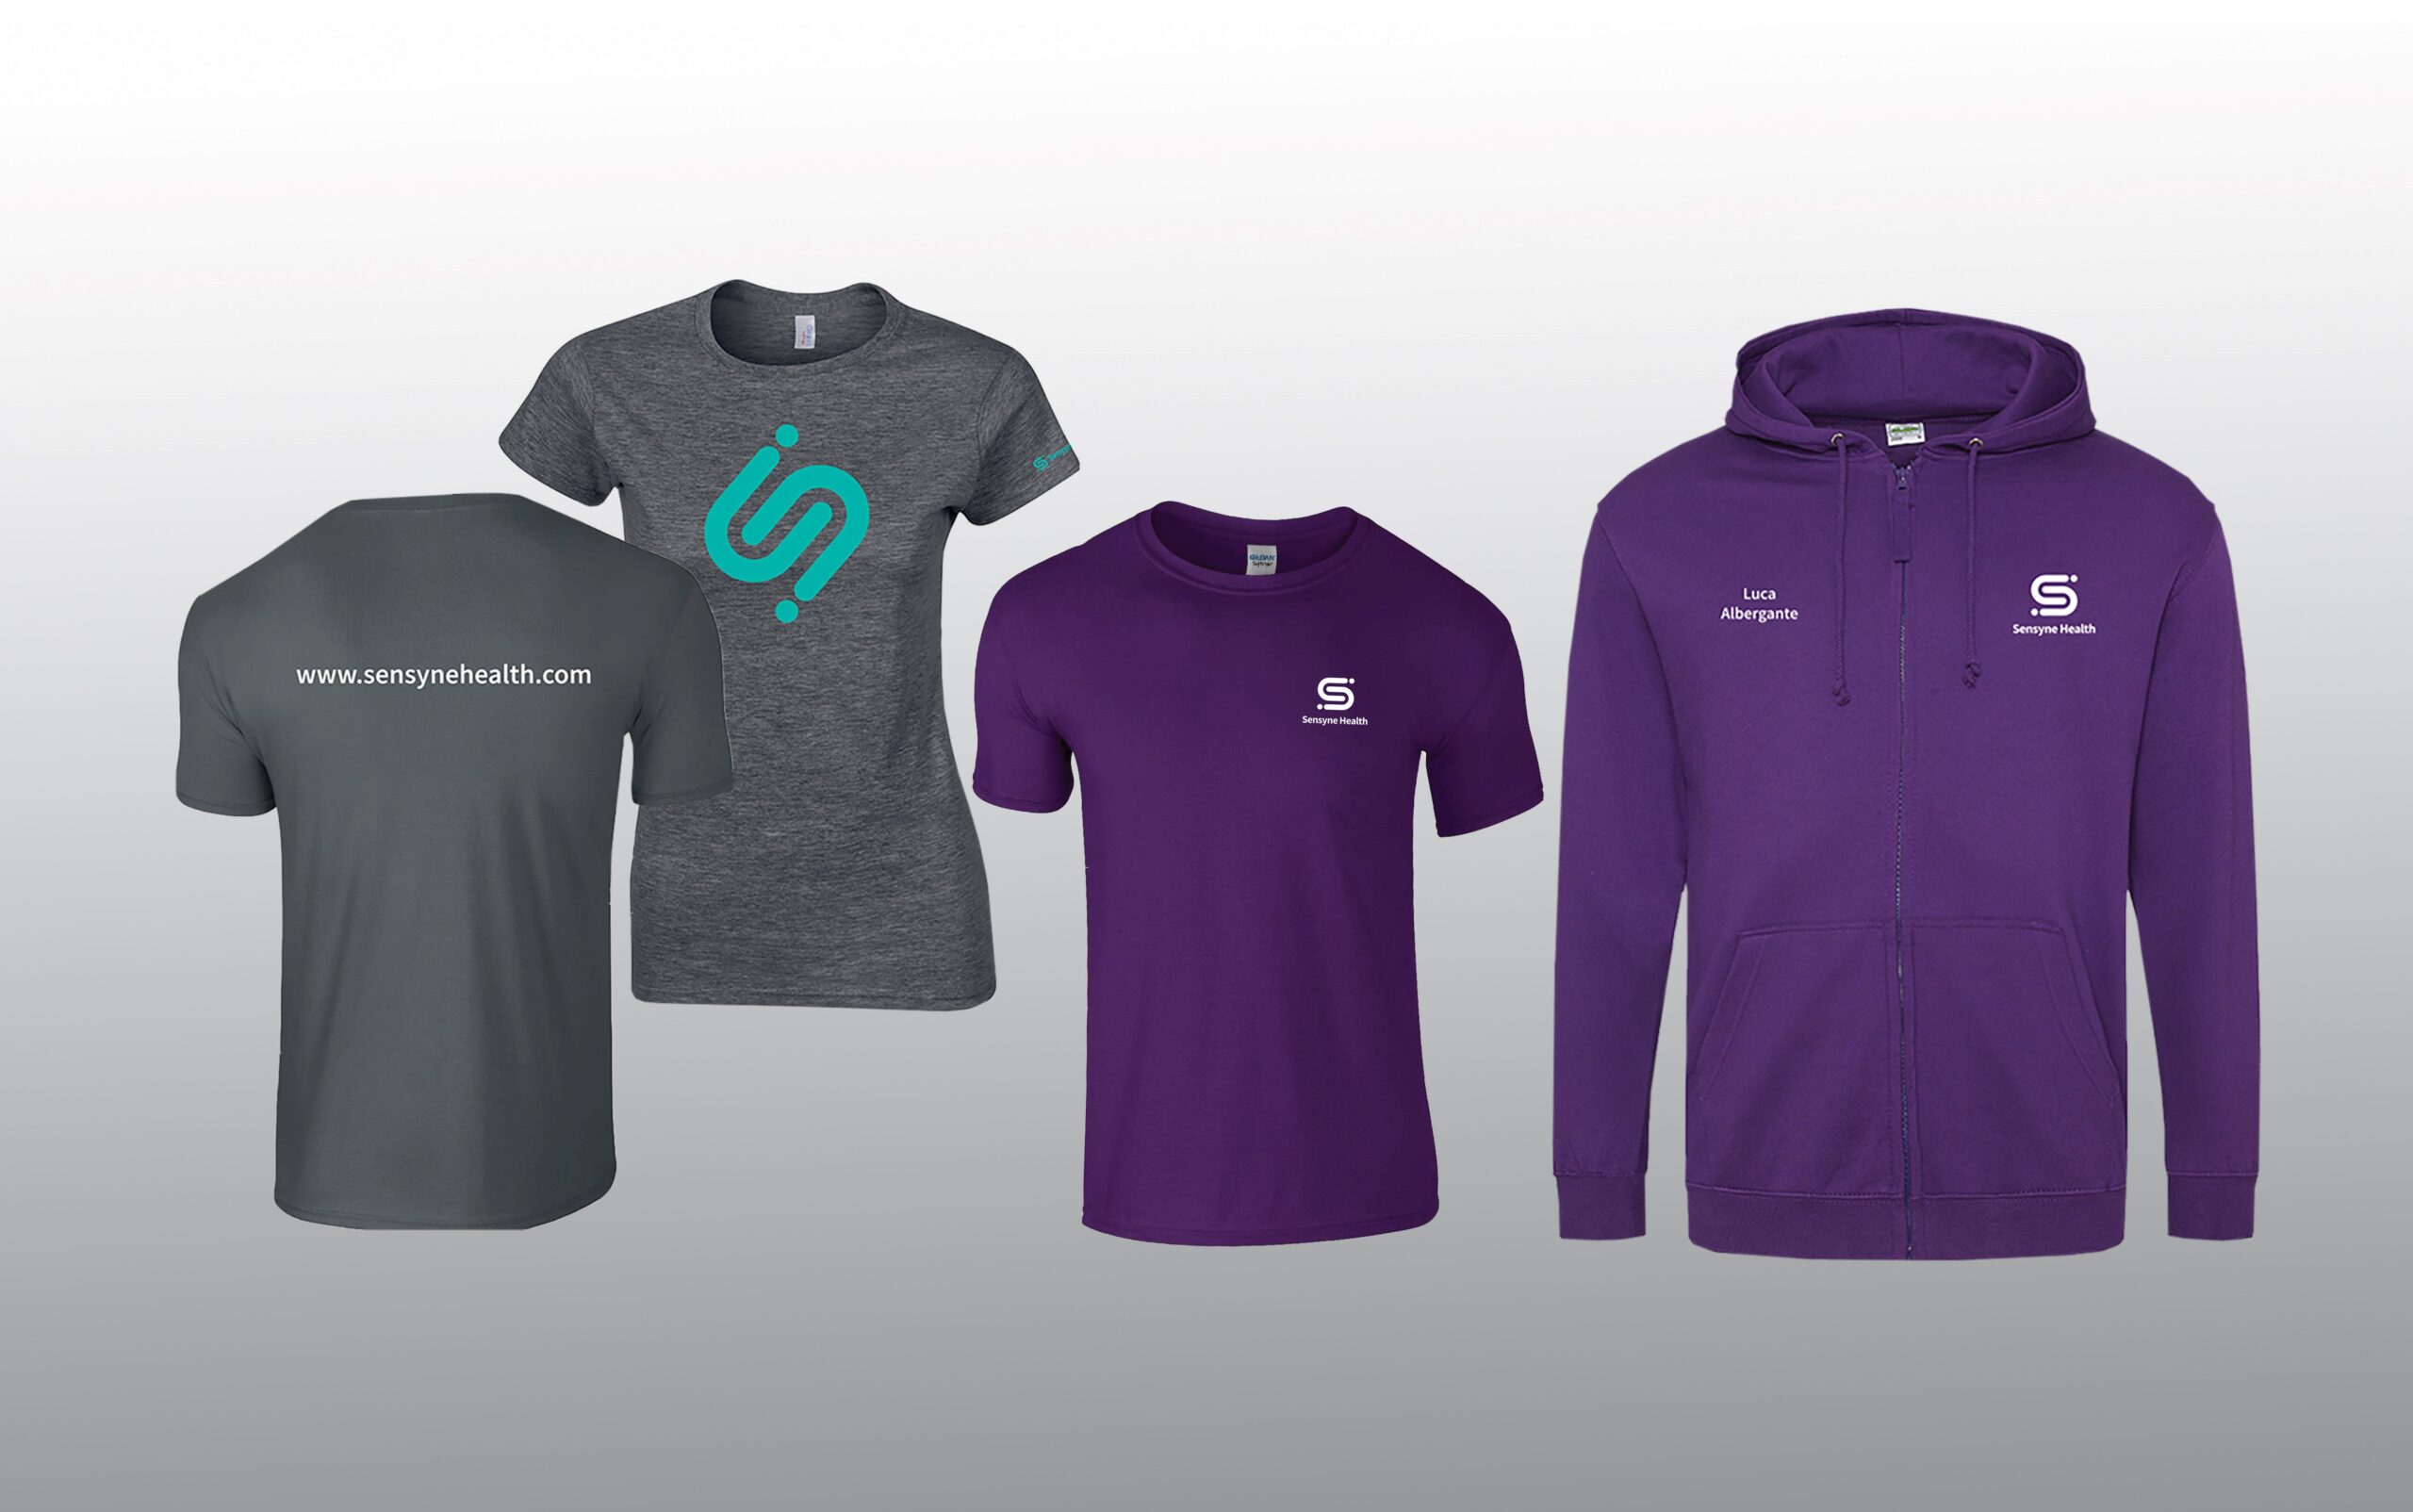 Branded Product Portal | Branded uniform supplier | Marketing and Merchandise